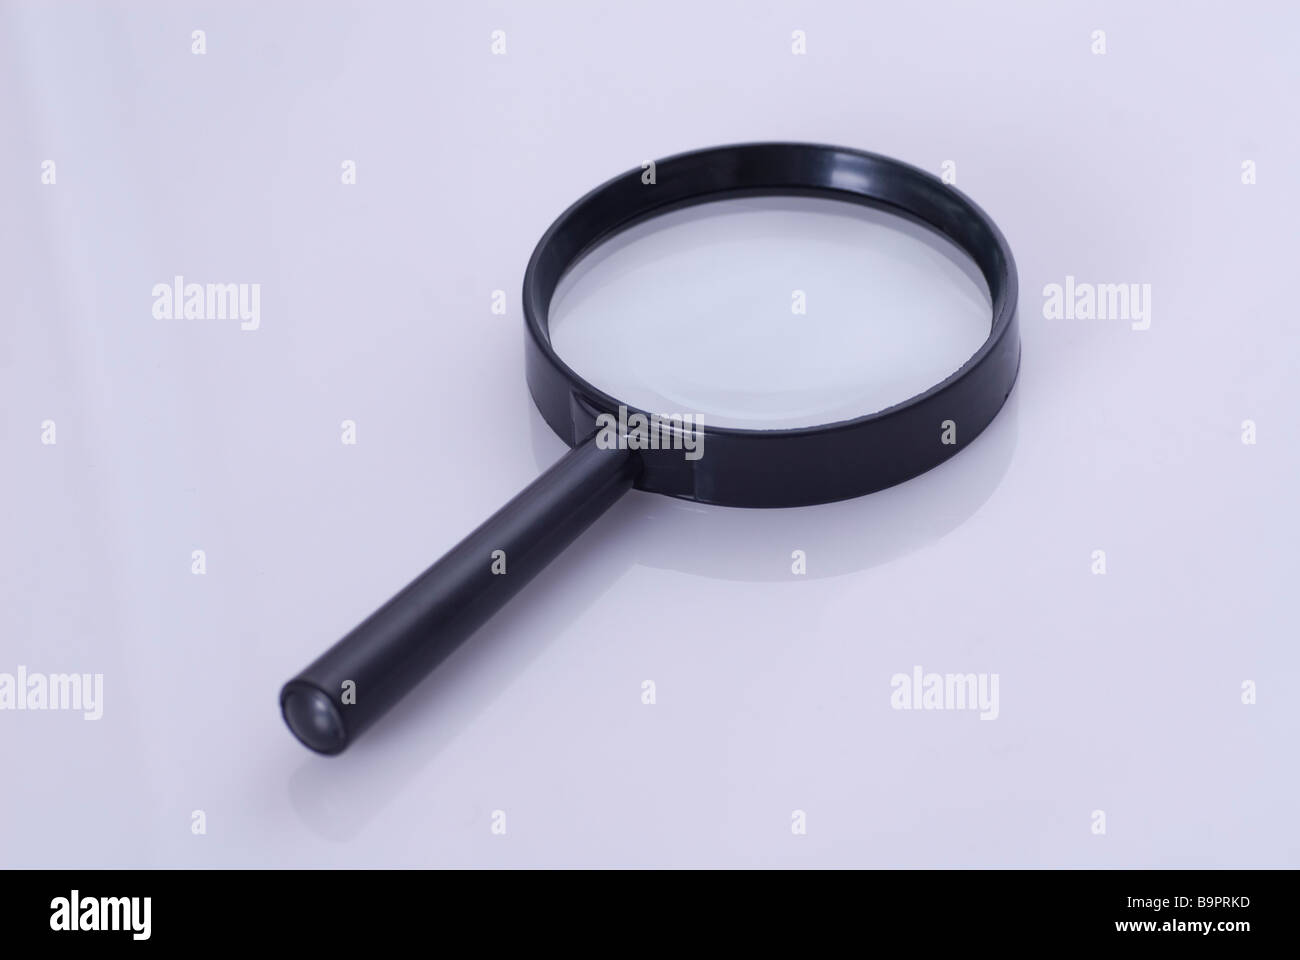 Magnifying glass on a white background Stock Photo